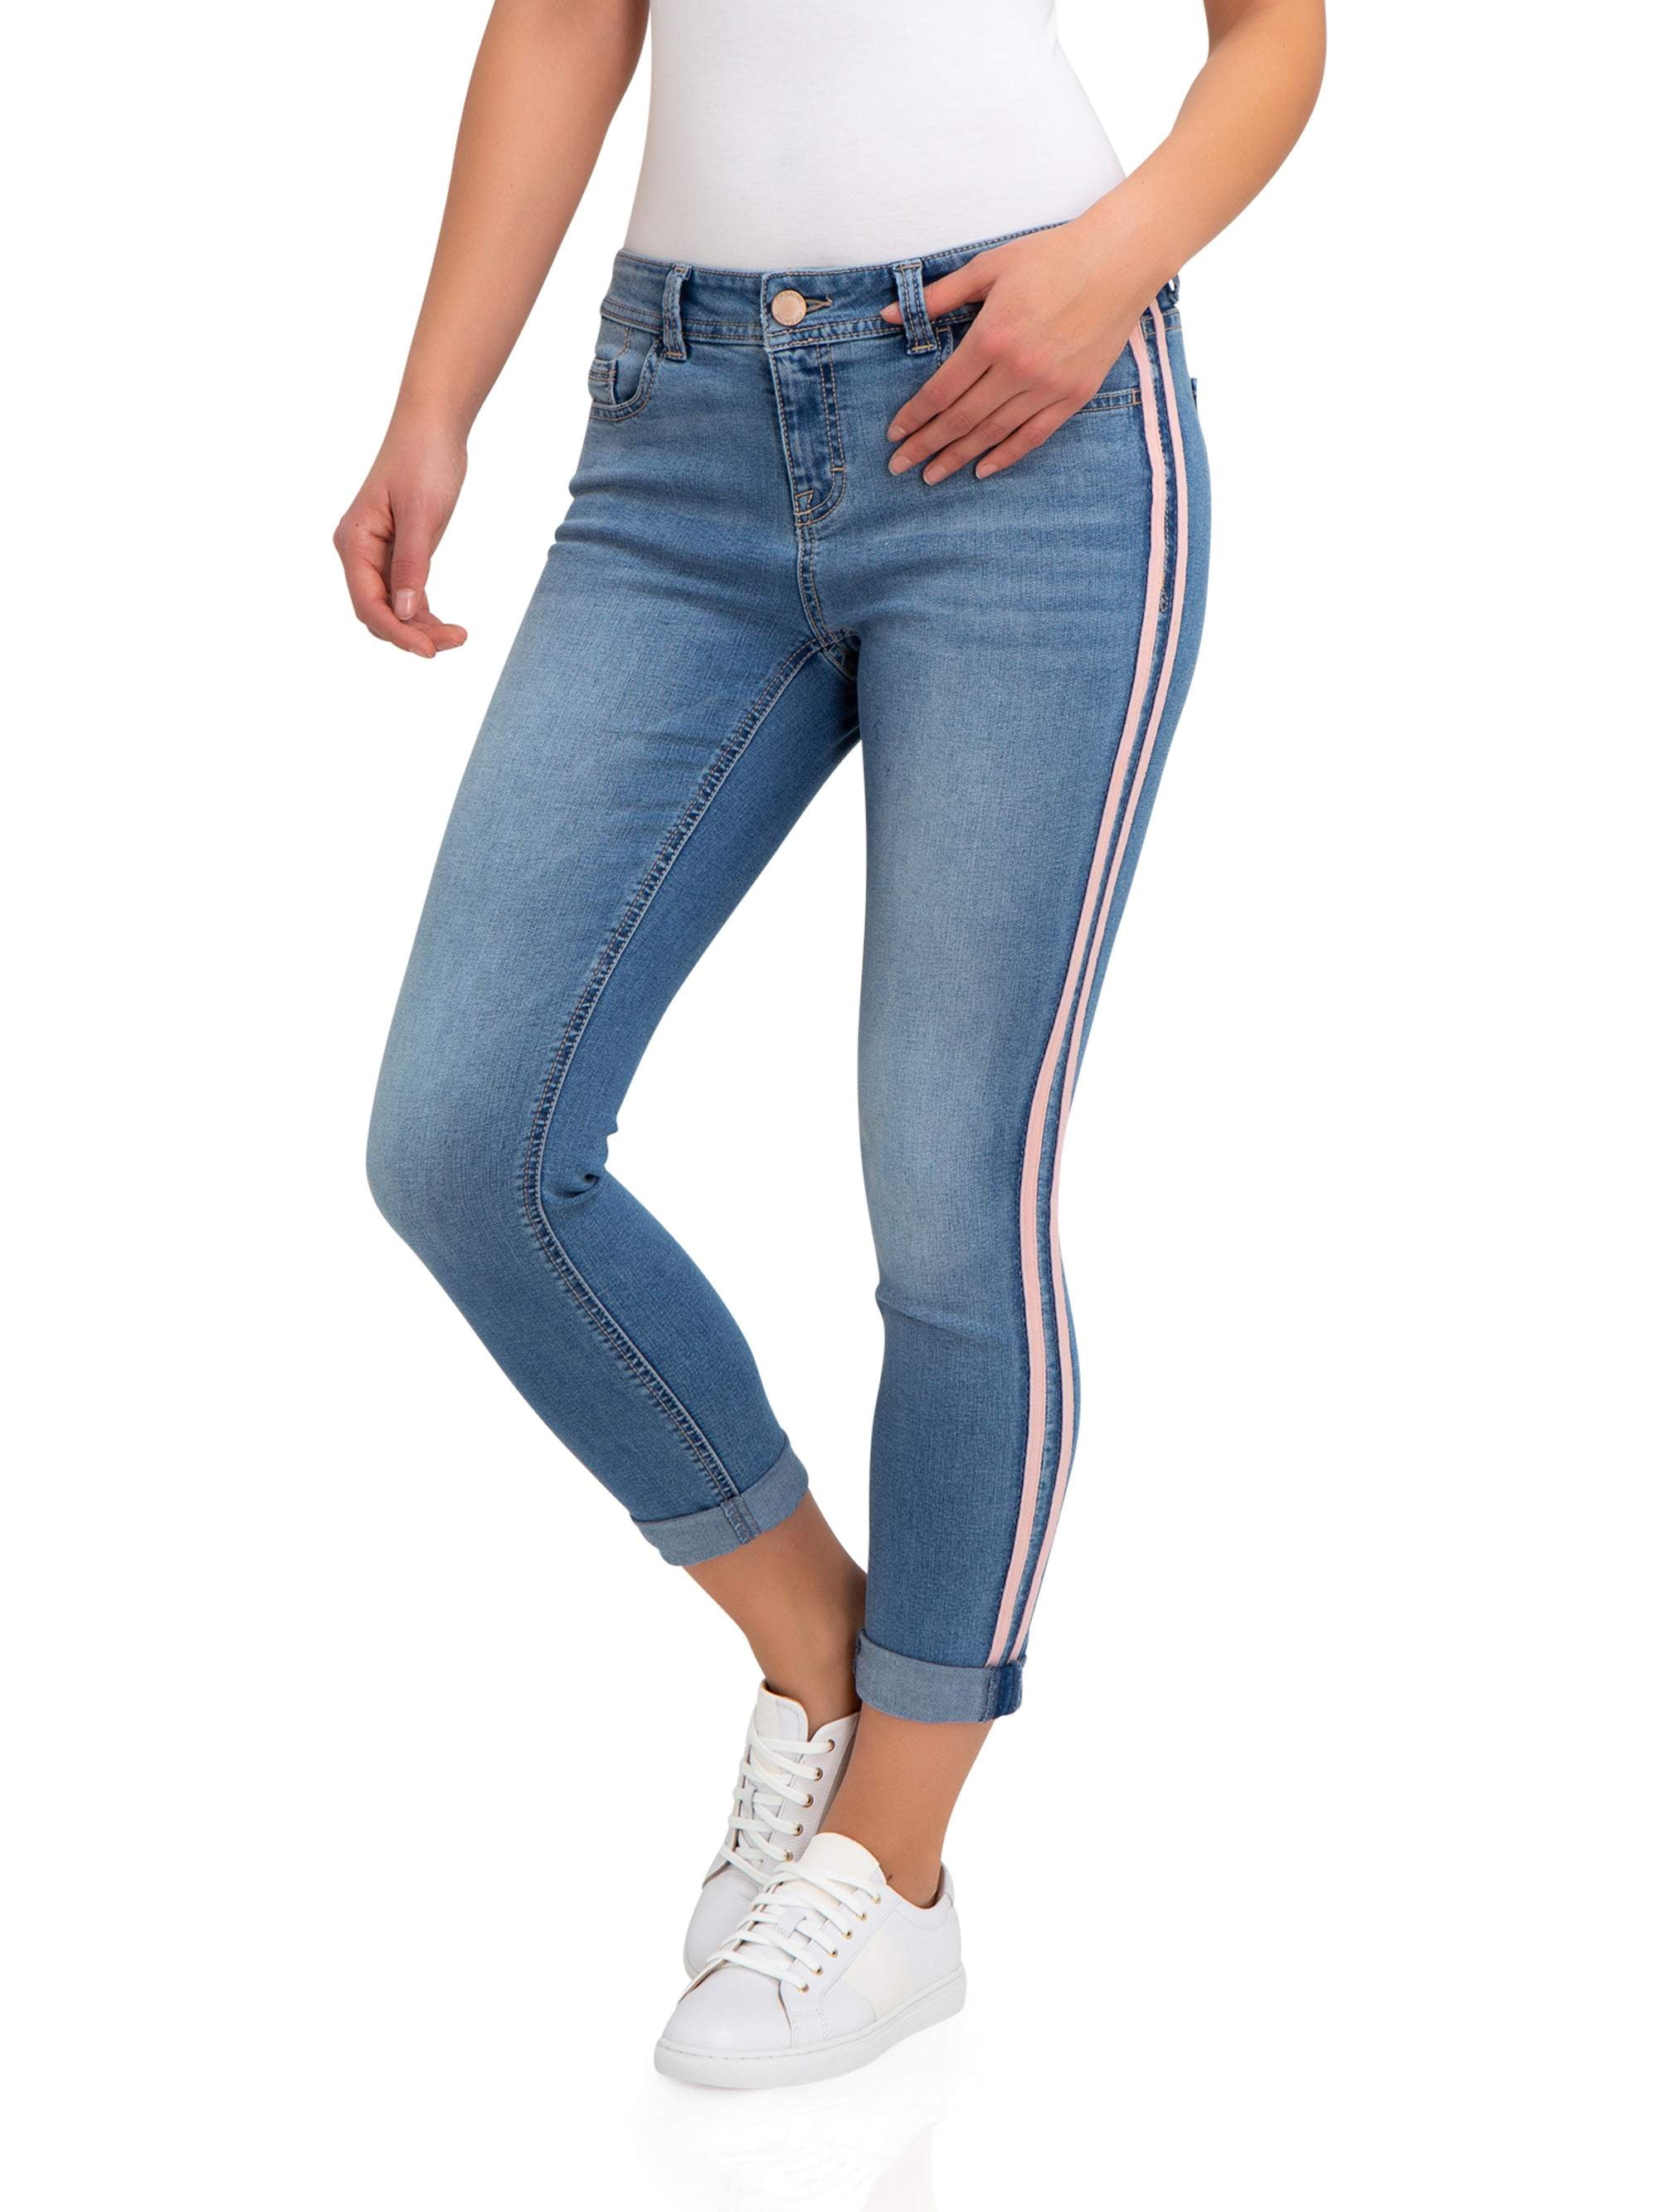 Jordache - Women's Super Soft Mid Rise Skinny Jeans with Side Tape ...